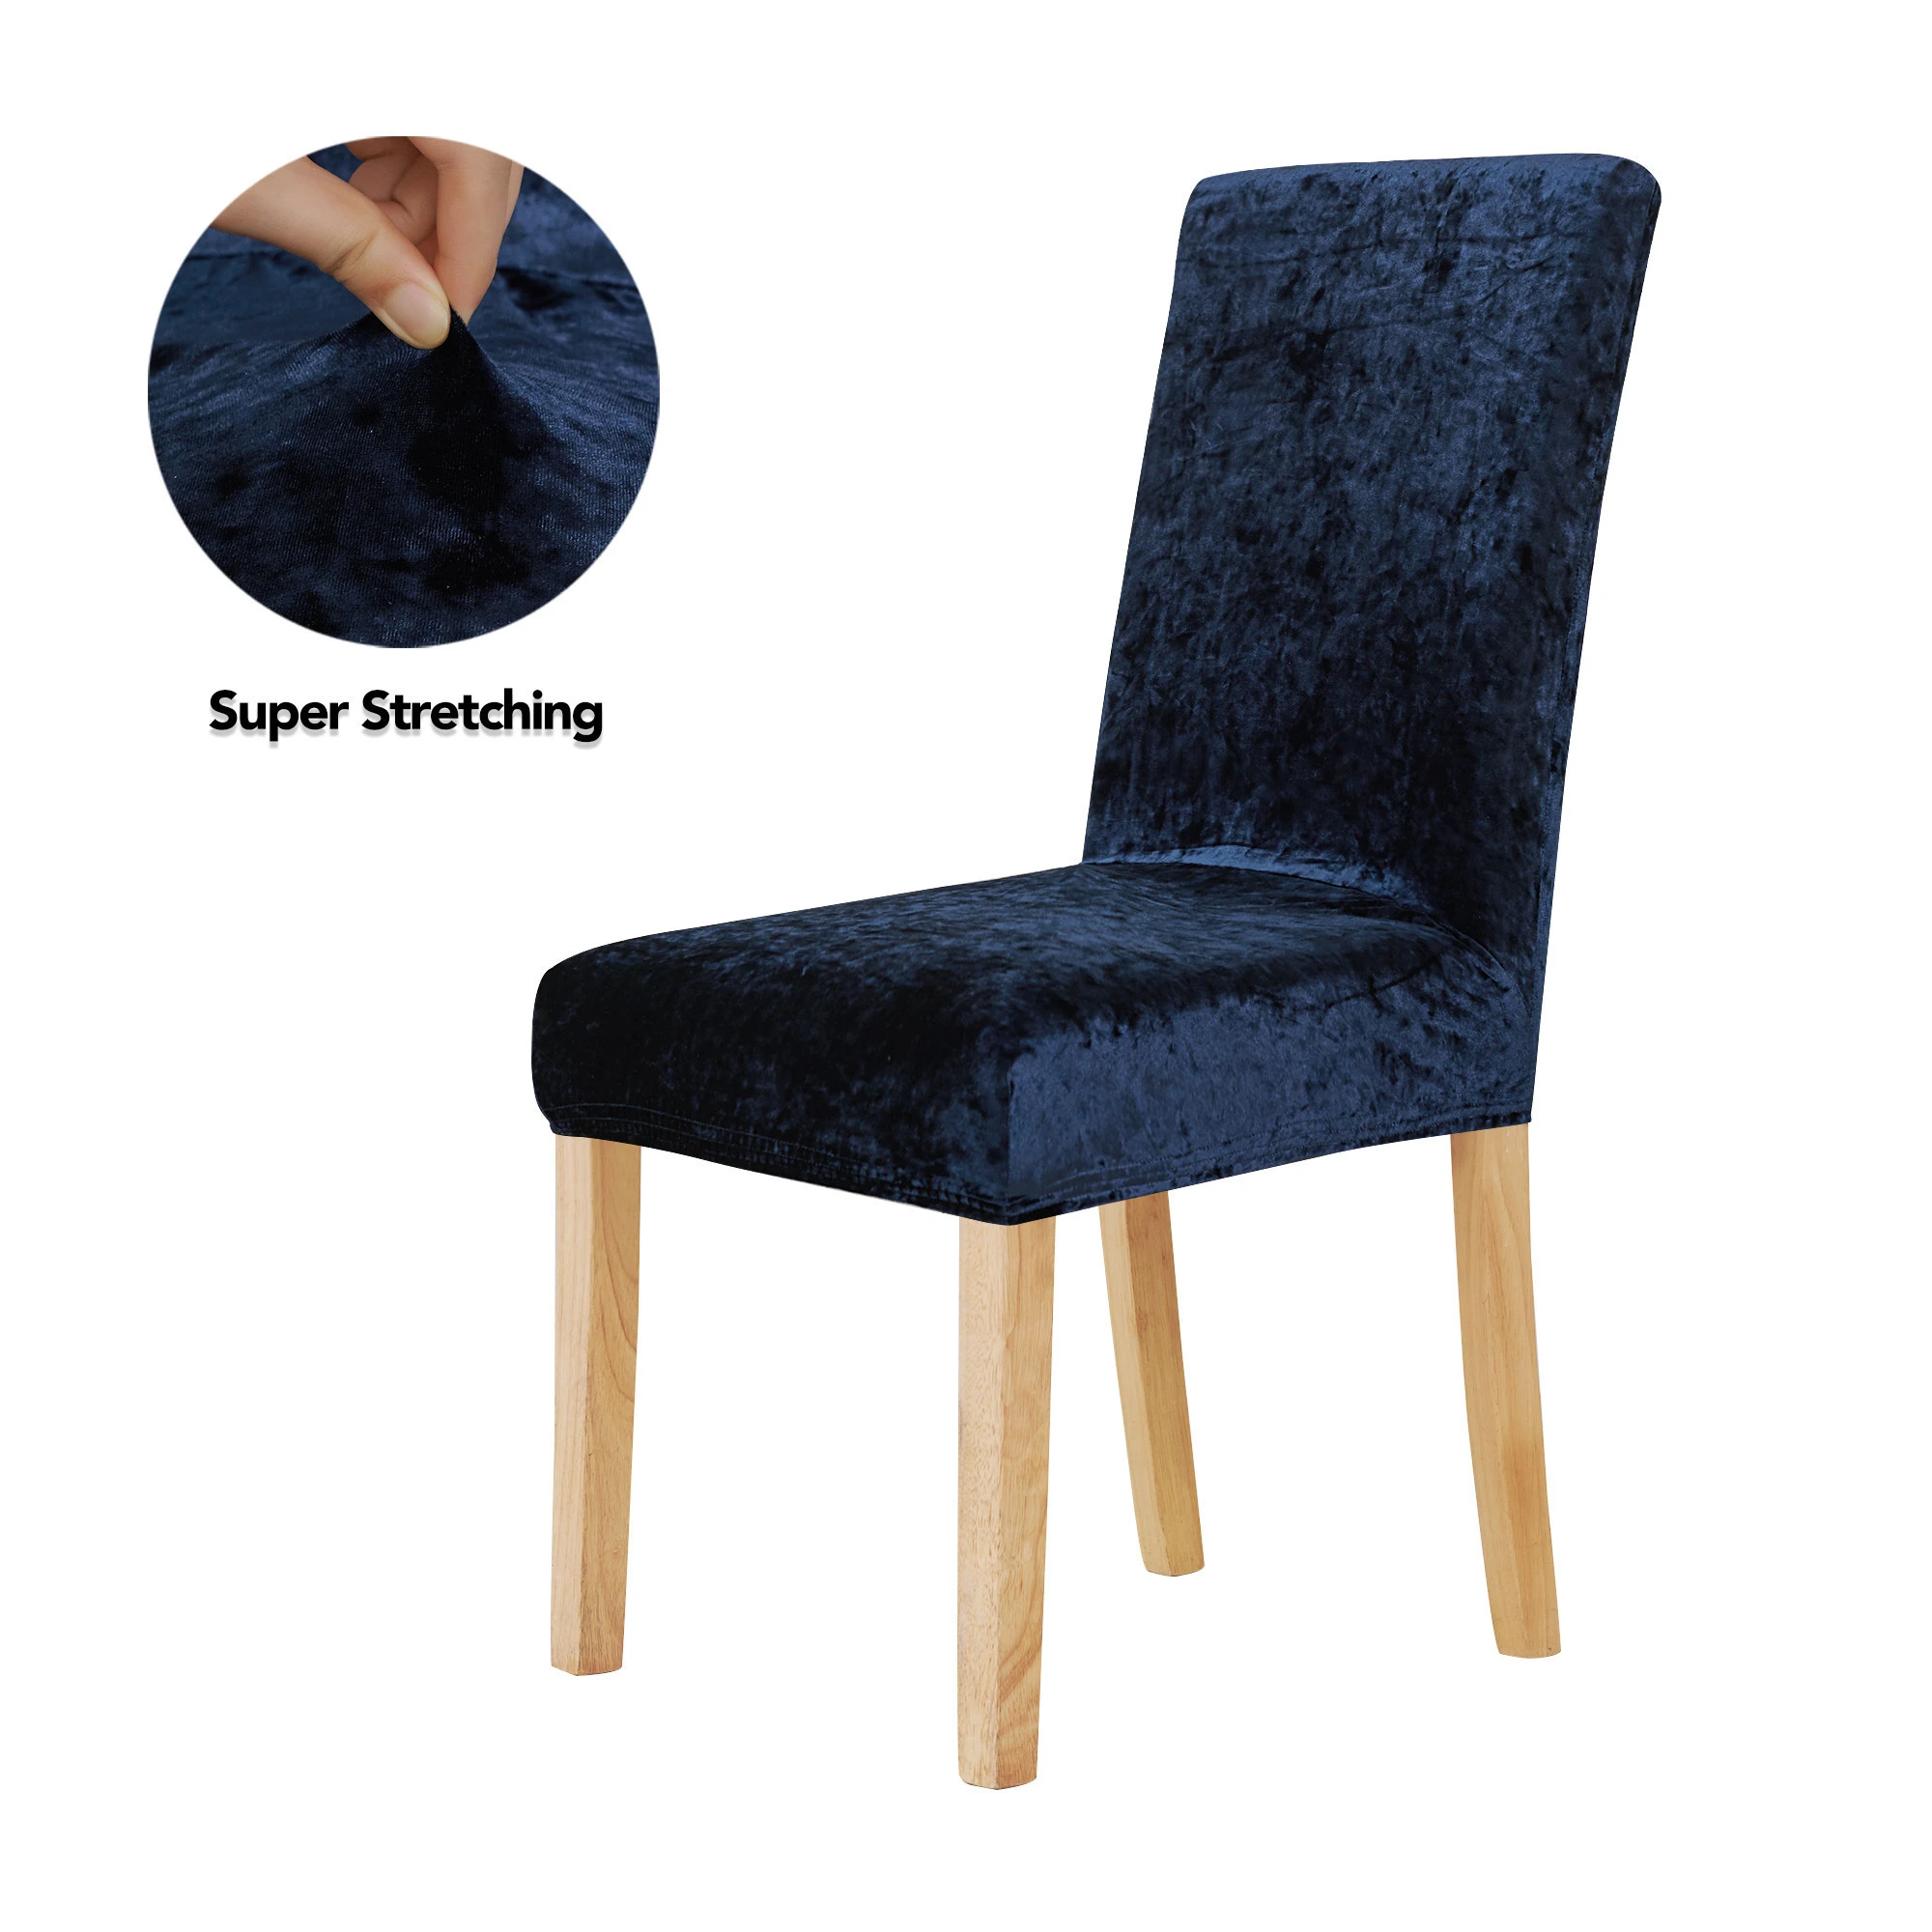 Cheap Navy Blue Polyester Spandex Stretch Chair Cover for Home Event Office Outdoor Chair Covers for Plastic Chair